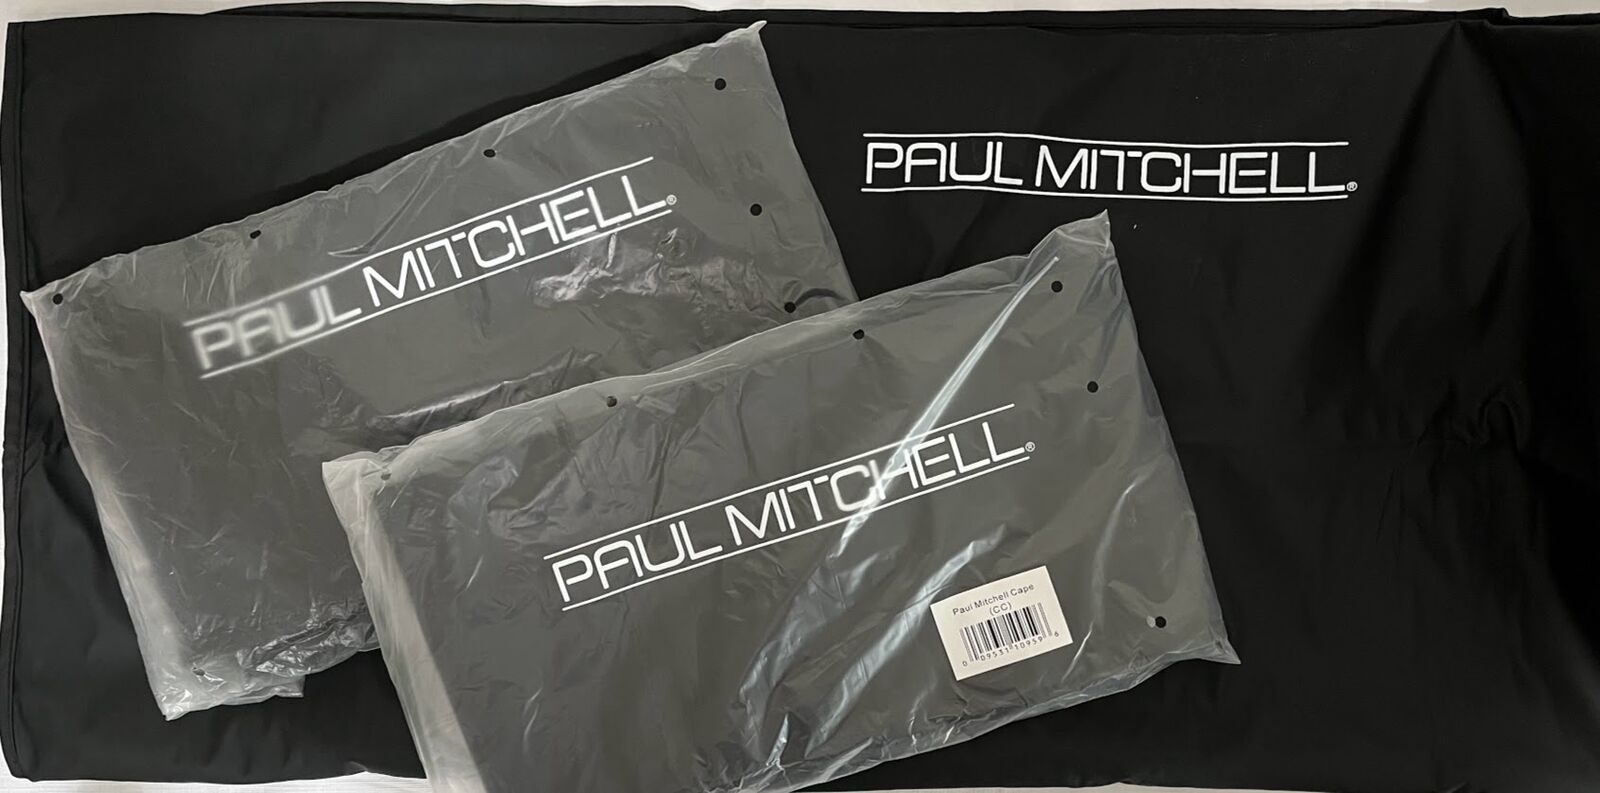 2 x Paul Mitchell Black Cut Color Chemical Cape W Snaps Hair Dye Free Shipping ! Paul Mitchell NOT SPECIFIED